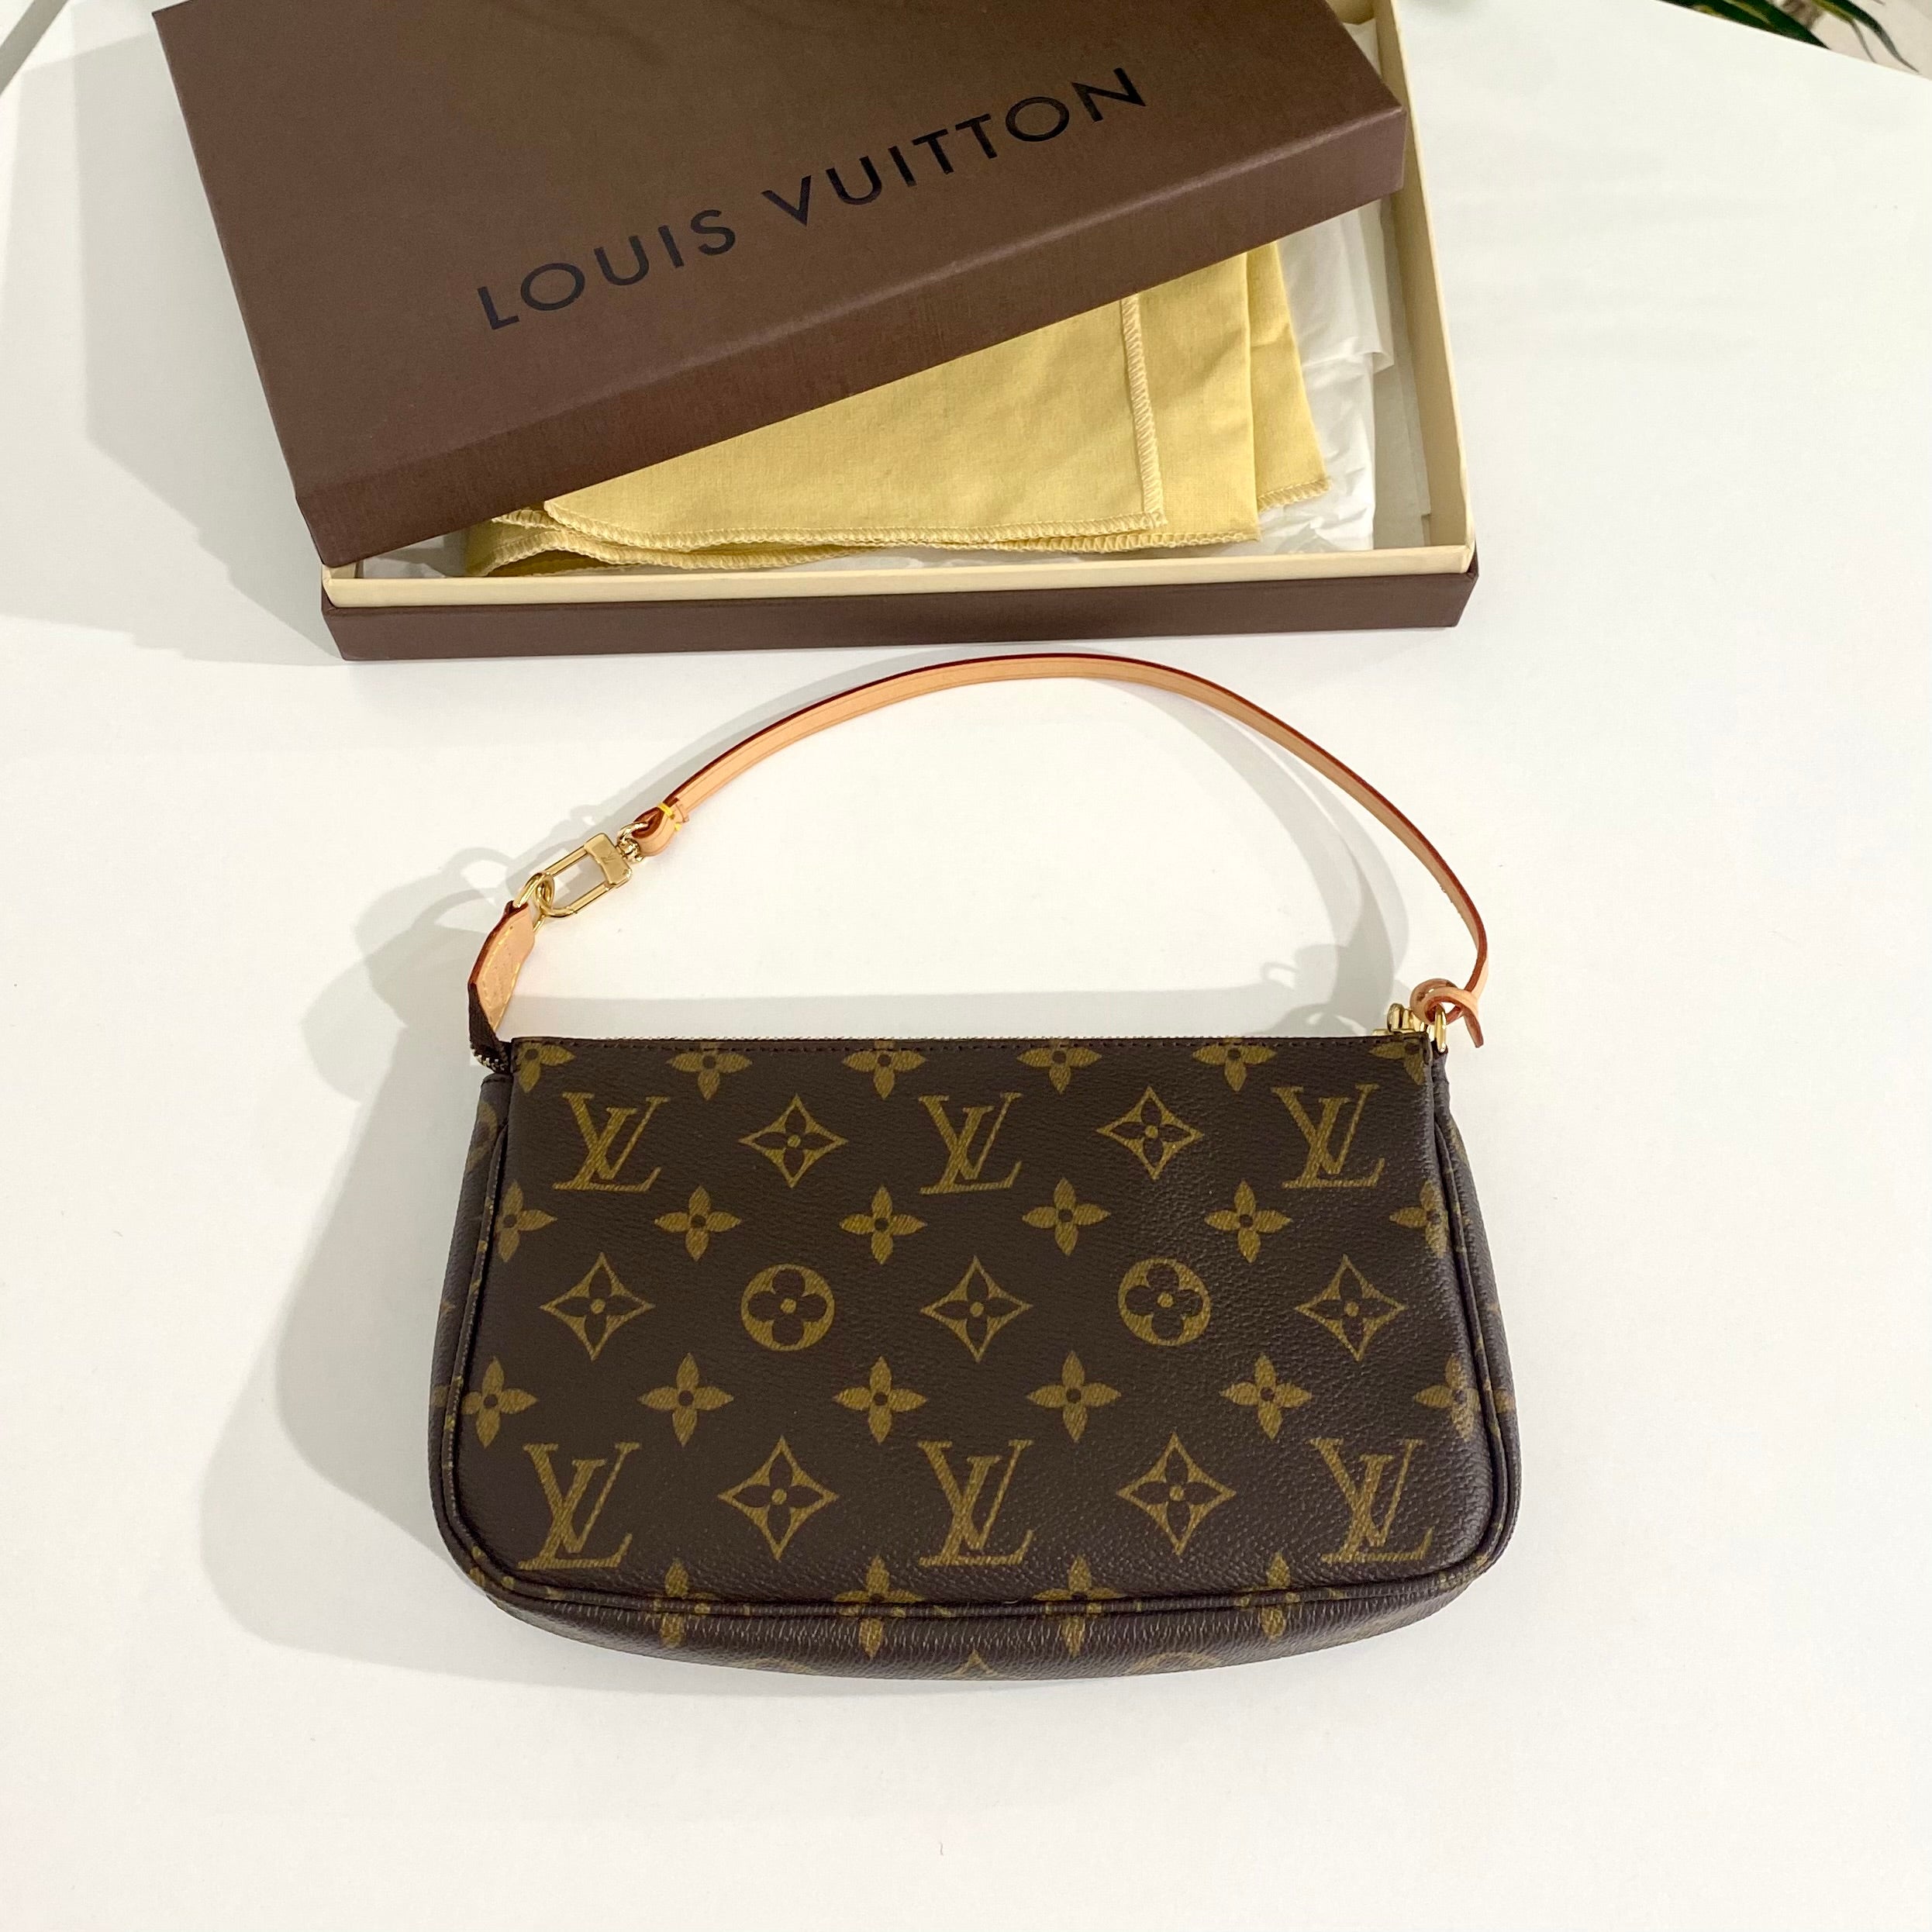 Personalized @louisvuitton Bag with trendy lines and initials 💎🤍 #akuz  #bags_akuz #customizedbag #louisvuitton #louisvuittonbag #lvbag…